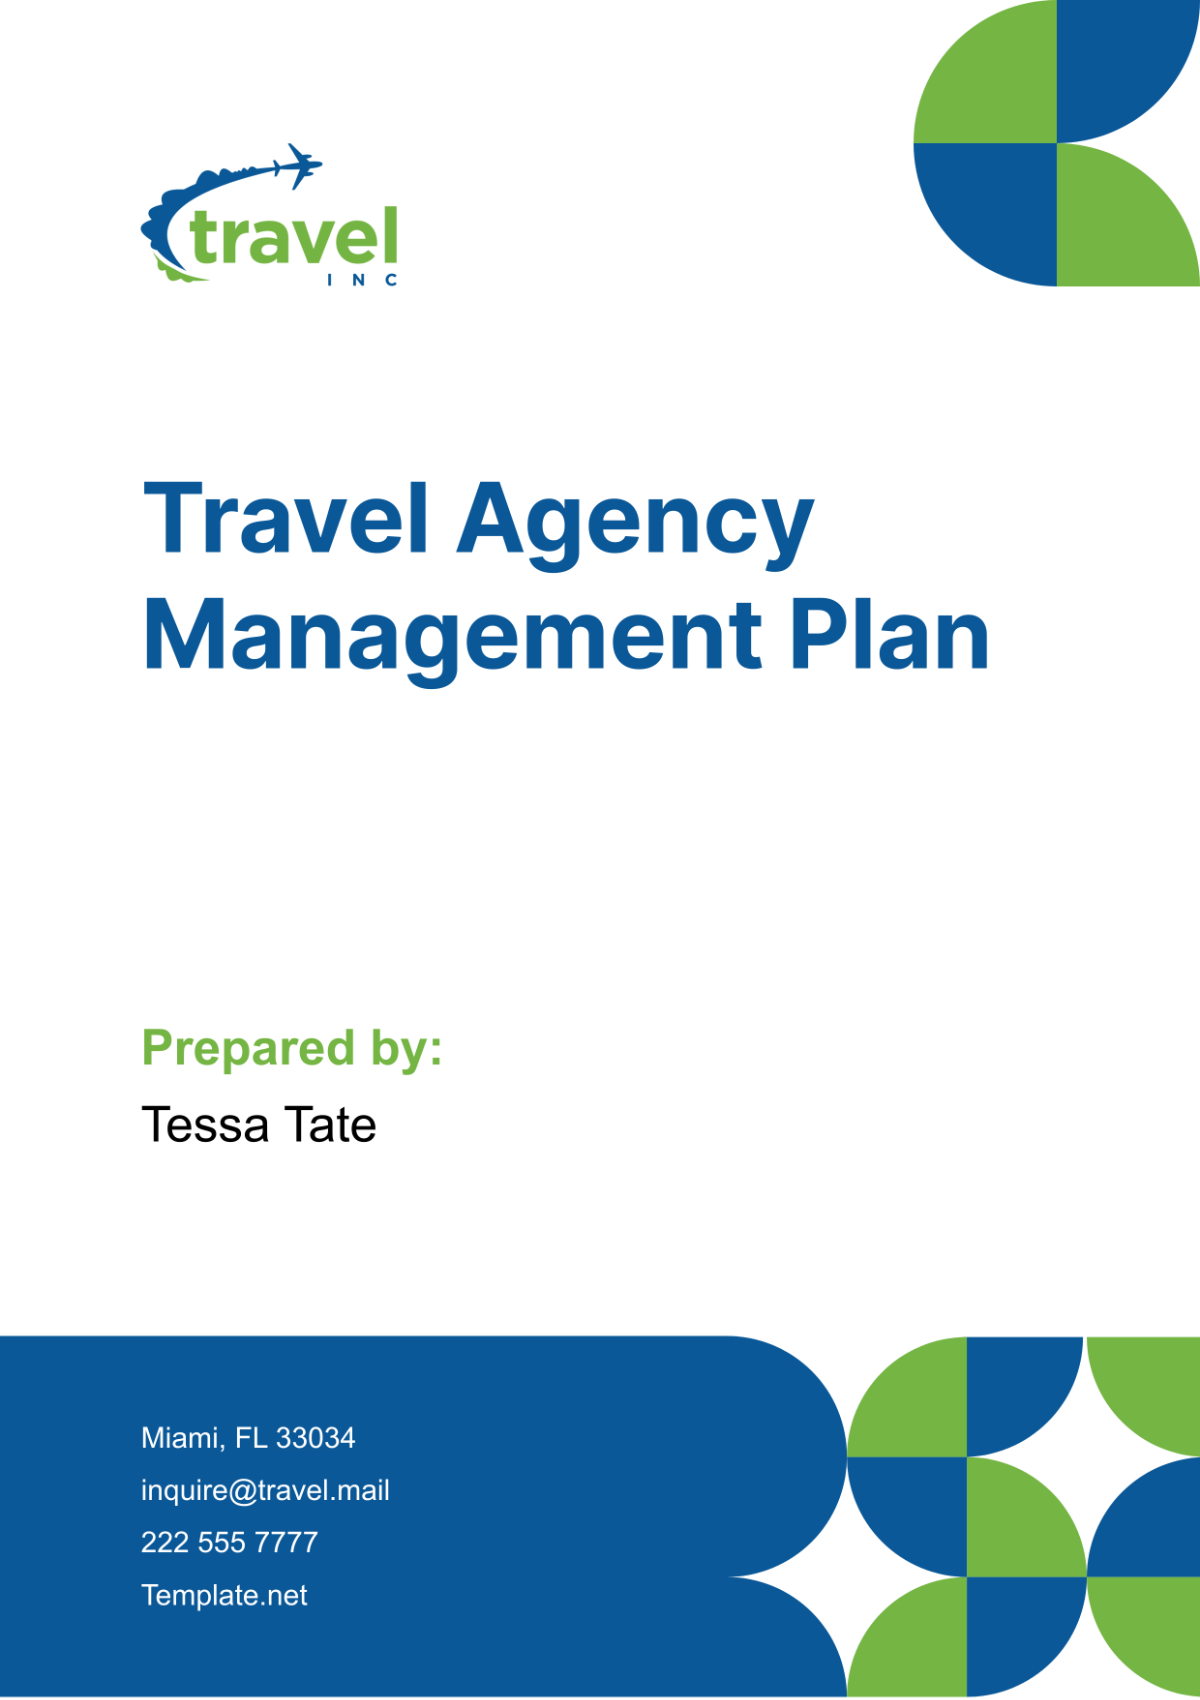 Travel Agency Management Plan Template